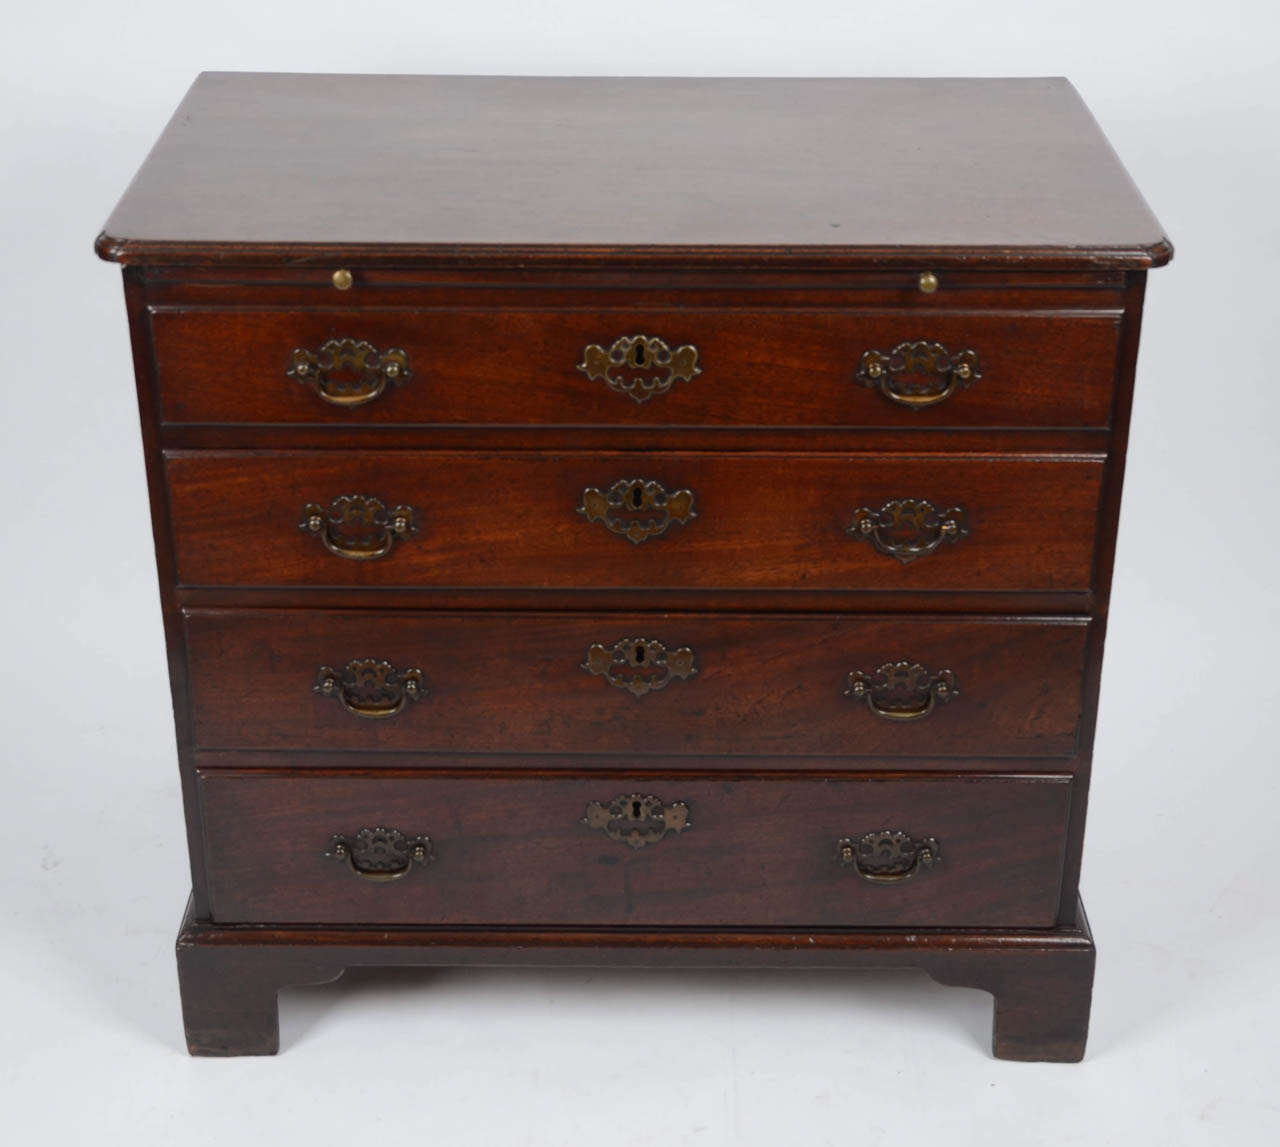 This is is the ultimate early George II period gem of mahogany cabinetmaking, sitting there now as a stylish, rich, mellow, and of course very useful piece of furniture.  Ones eyes are drawn by the sophisticated details; from the re-entrant  corners